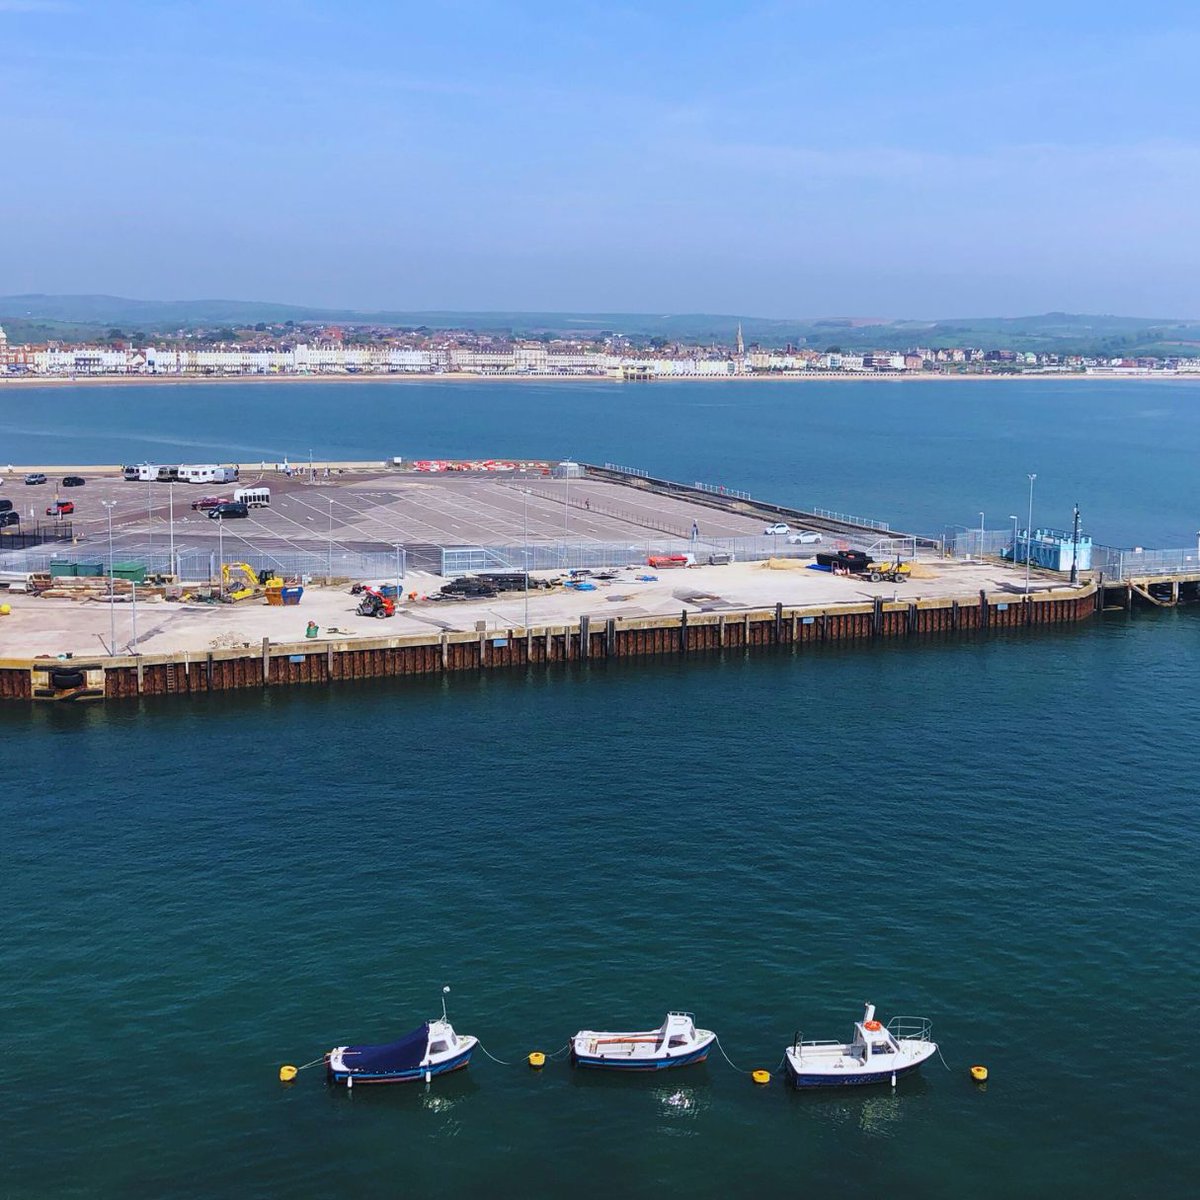 The Nothe Fort provides a fantastic viewpoint of Weymouth 🌊 🏖️ 😍 

#visitweymouth #weymouthbeach #spring #summer #weymouth #dorset #beachweather #nothefort #nothegardens #weymouthharbour #seaviews